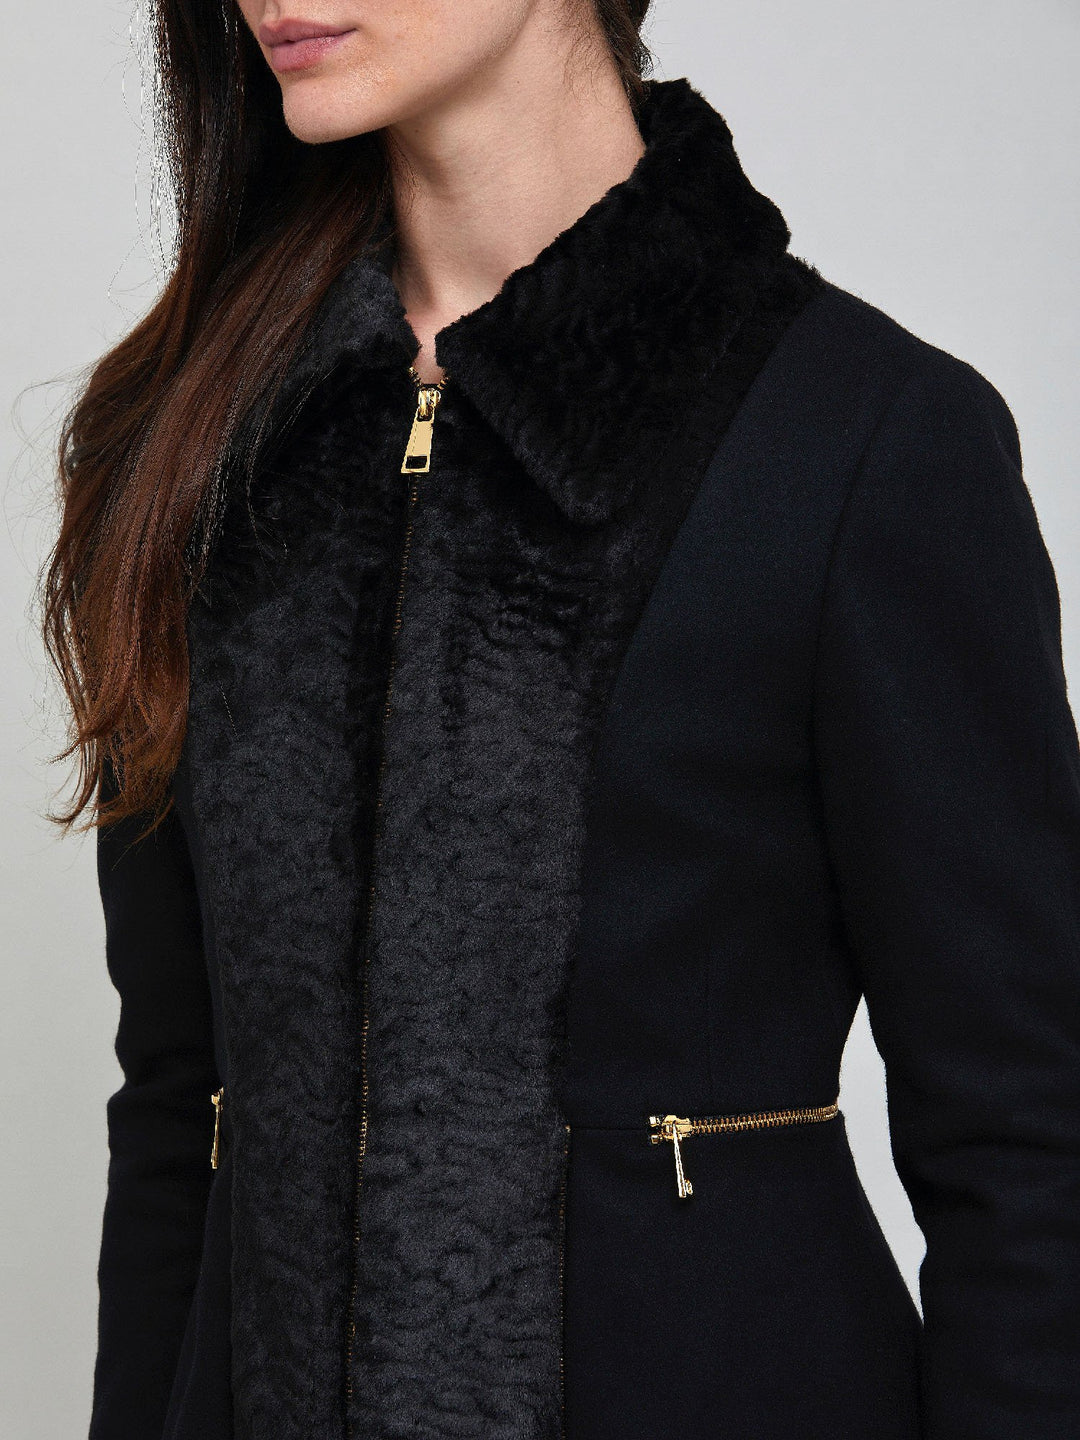 Elizabeth, true timeless sophistication in a black coat. An over-the-knee length coat made of cashmere blend, embellished with faux fur front panels and gold metal zippers, you will wear day after day.  Team with Belle or jill pant or for minimal style.